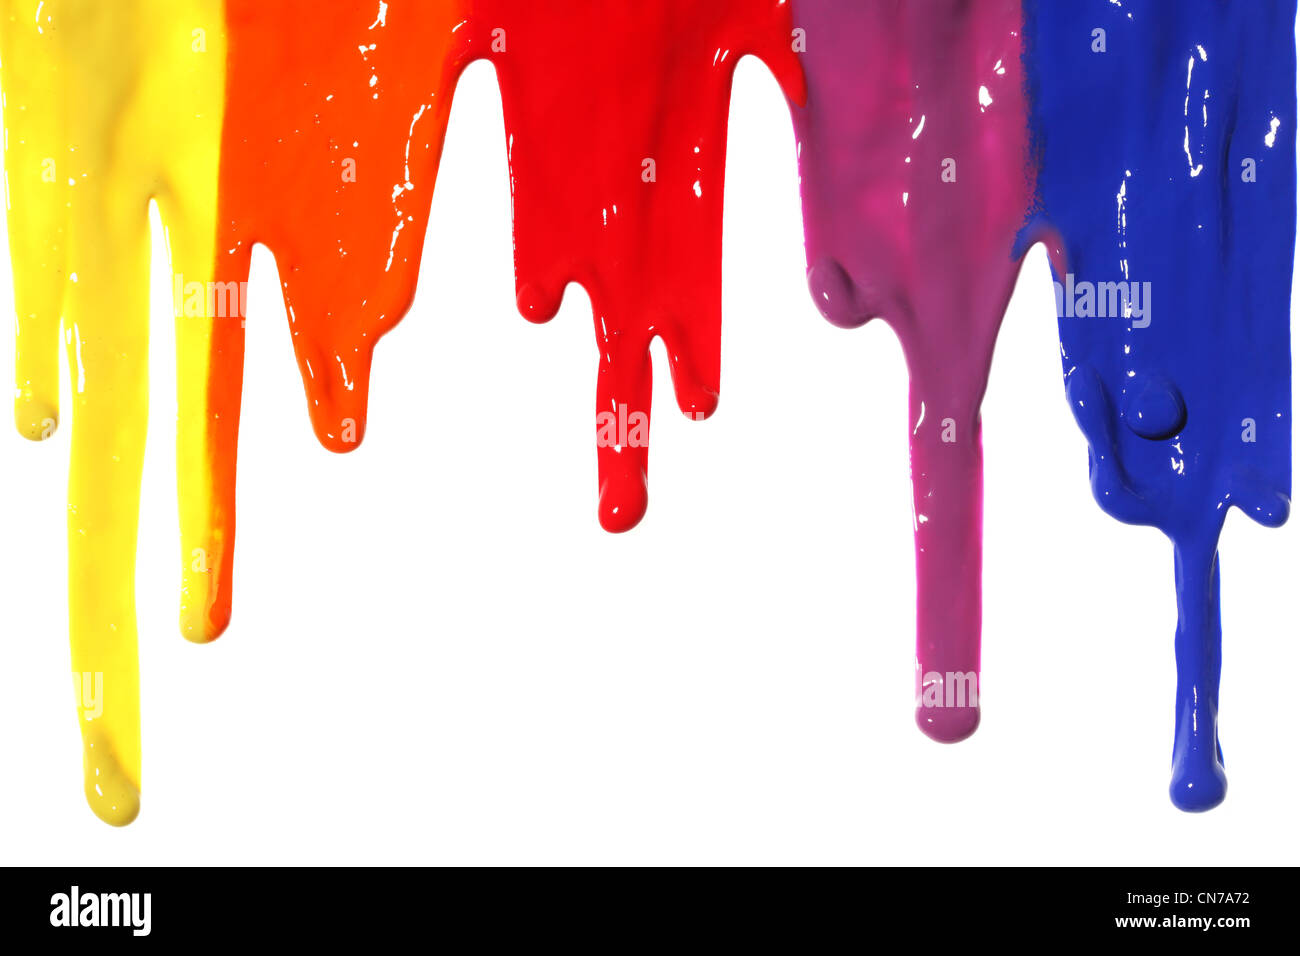 Different colors of paint dripping Stock Photo